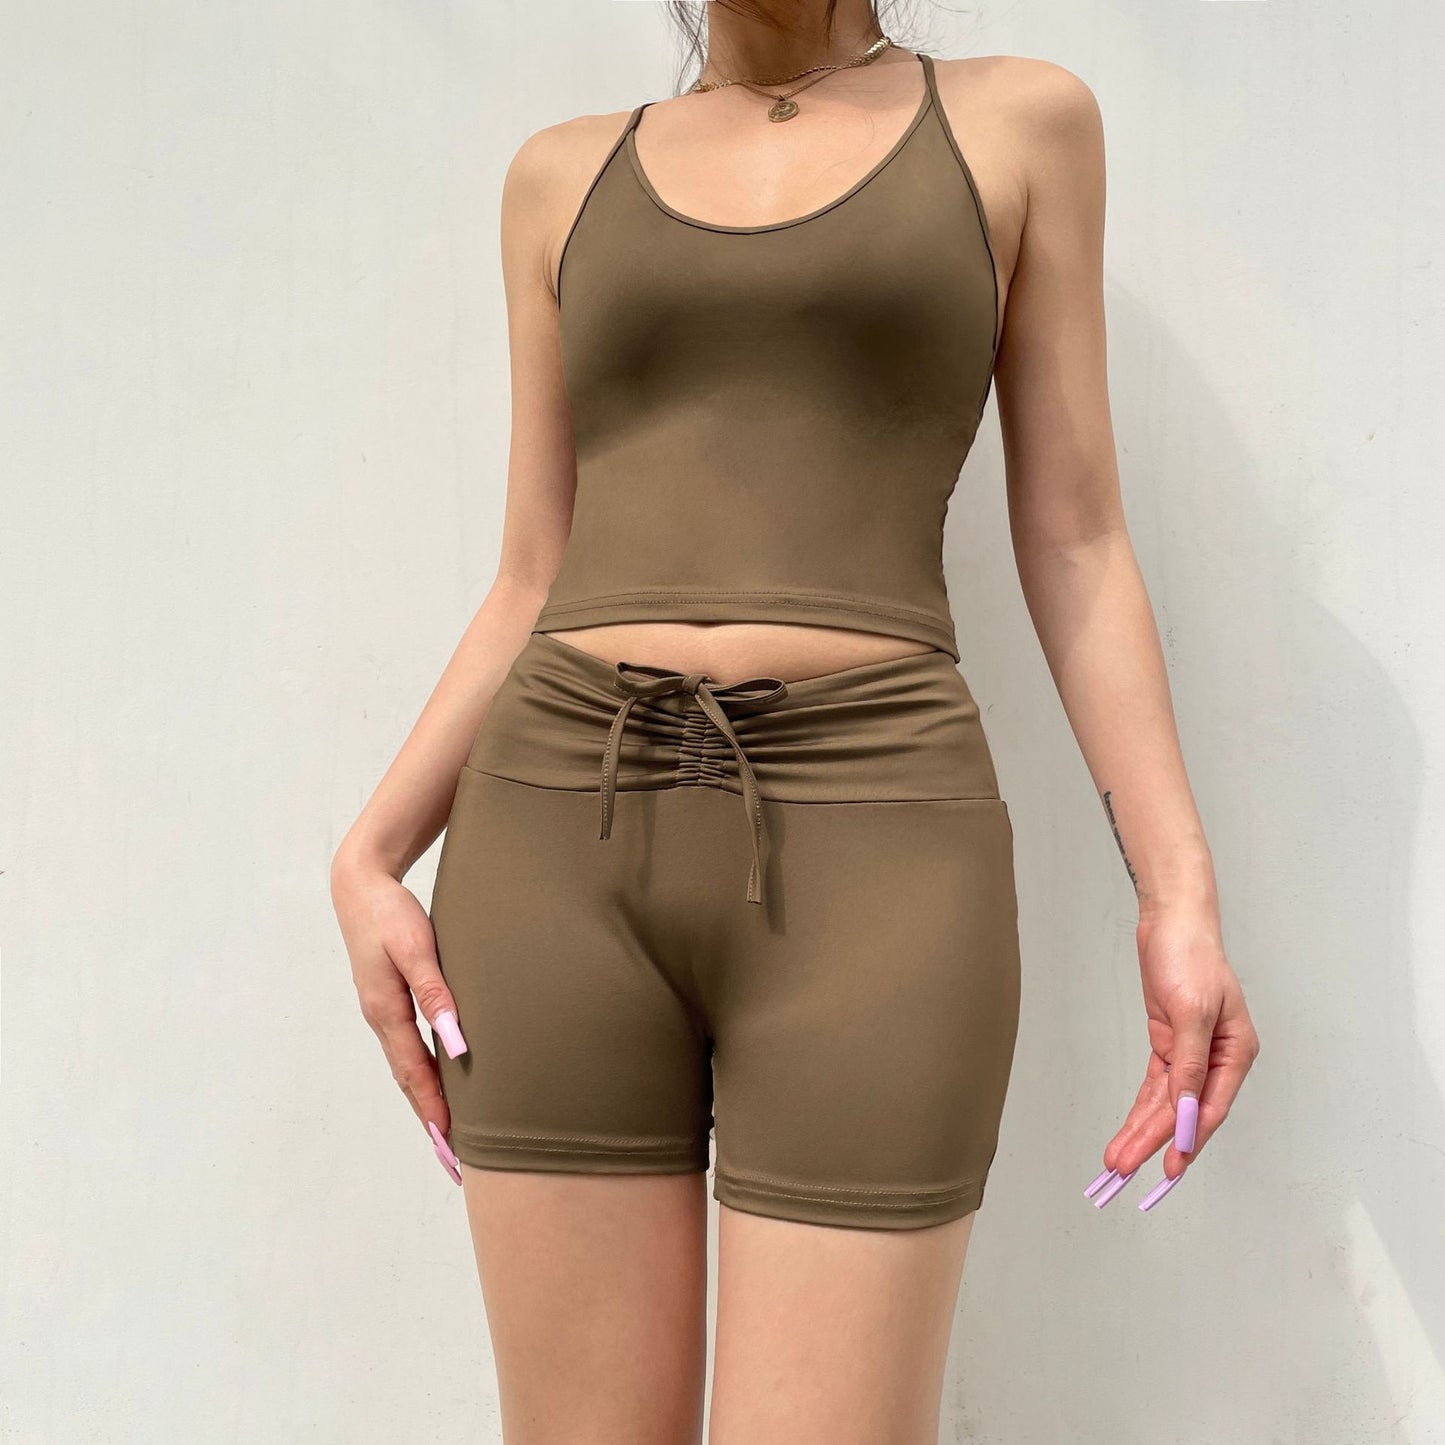 Casual Women Solid Color Basic Camisole Drawstring Lace up High Waist Peach Hip Shorts Set